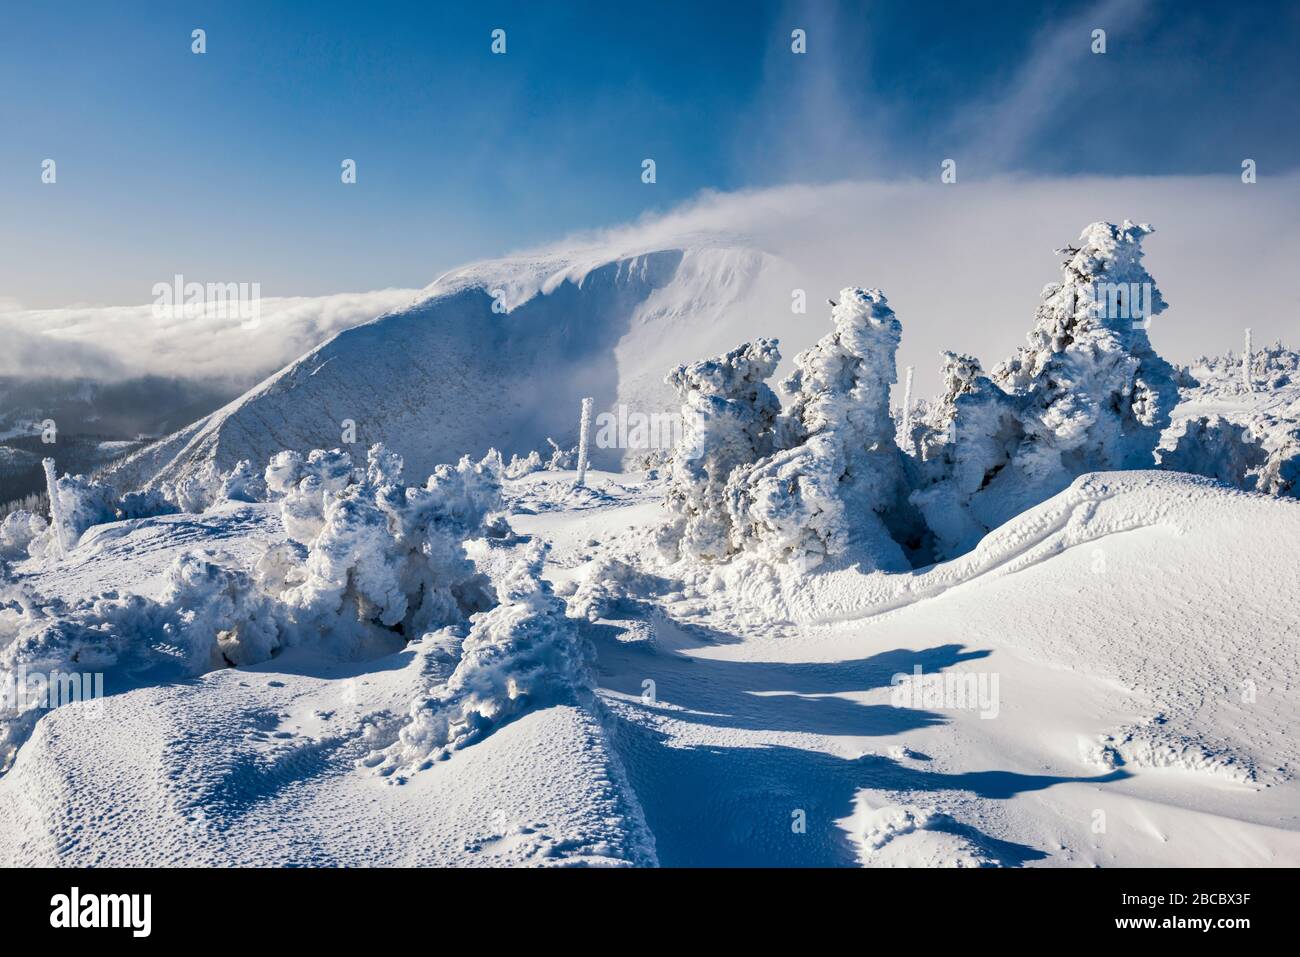 Trees, ice and snow encased, foehn cloud in distance, subalpine plateau at timber line, Karkonosze National Park, Lower Silesia, Poland Stock Photo